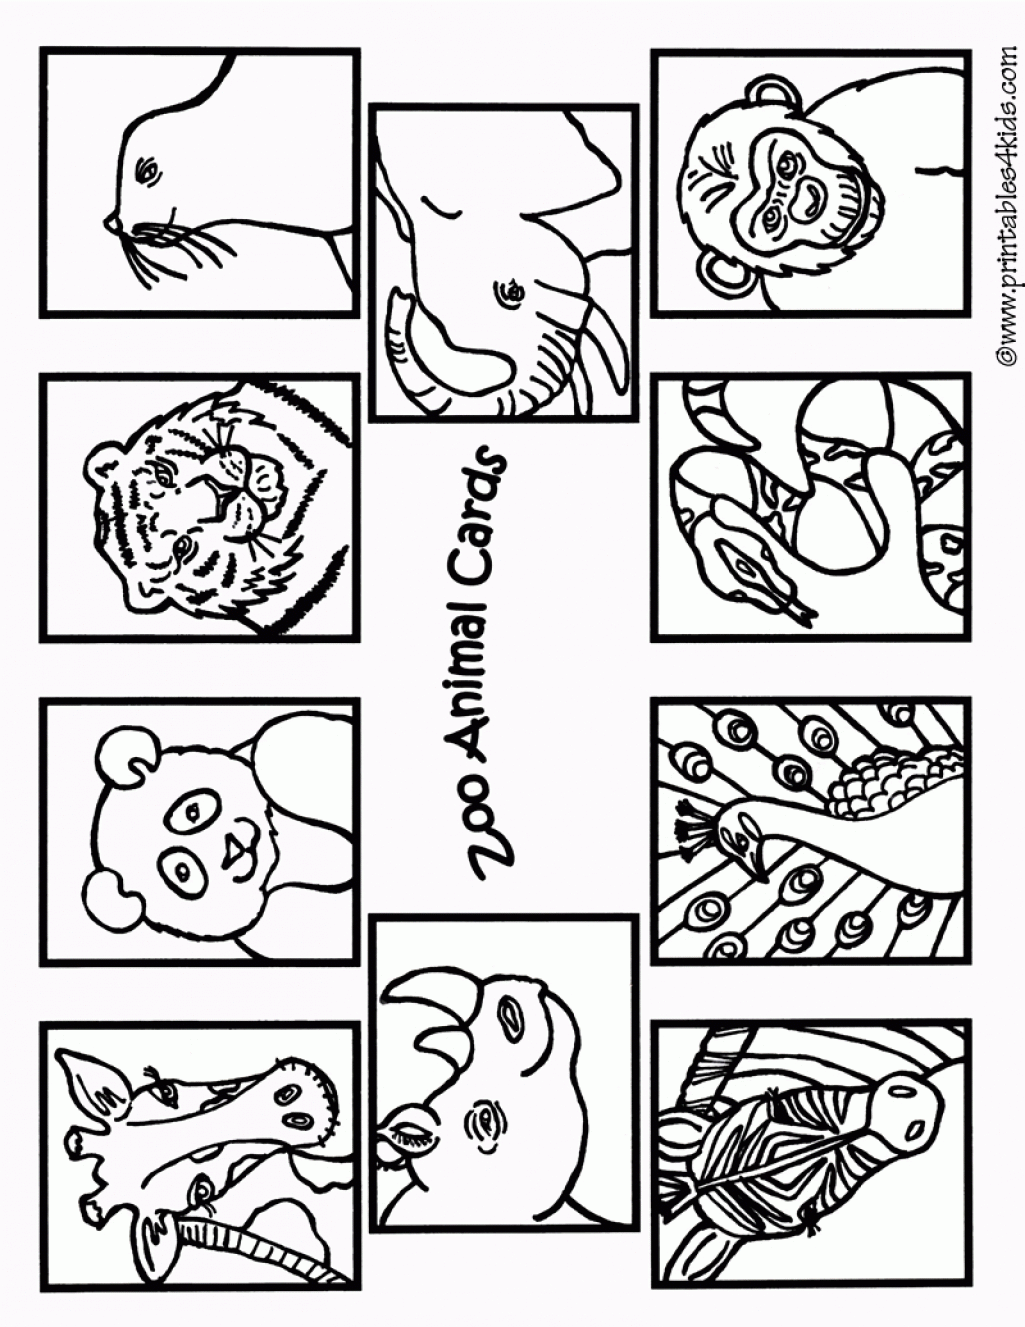 Free Zoo Animal Coloring Pages Printable, Download Free Zoo Animal